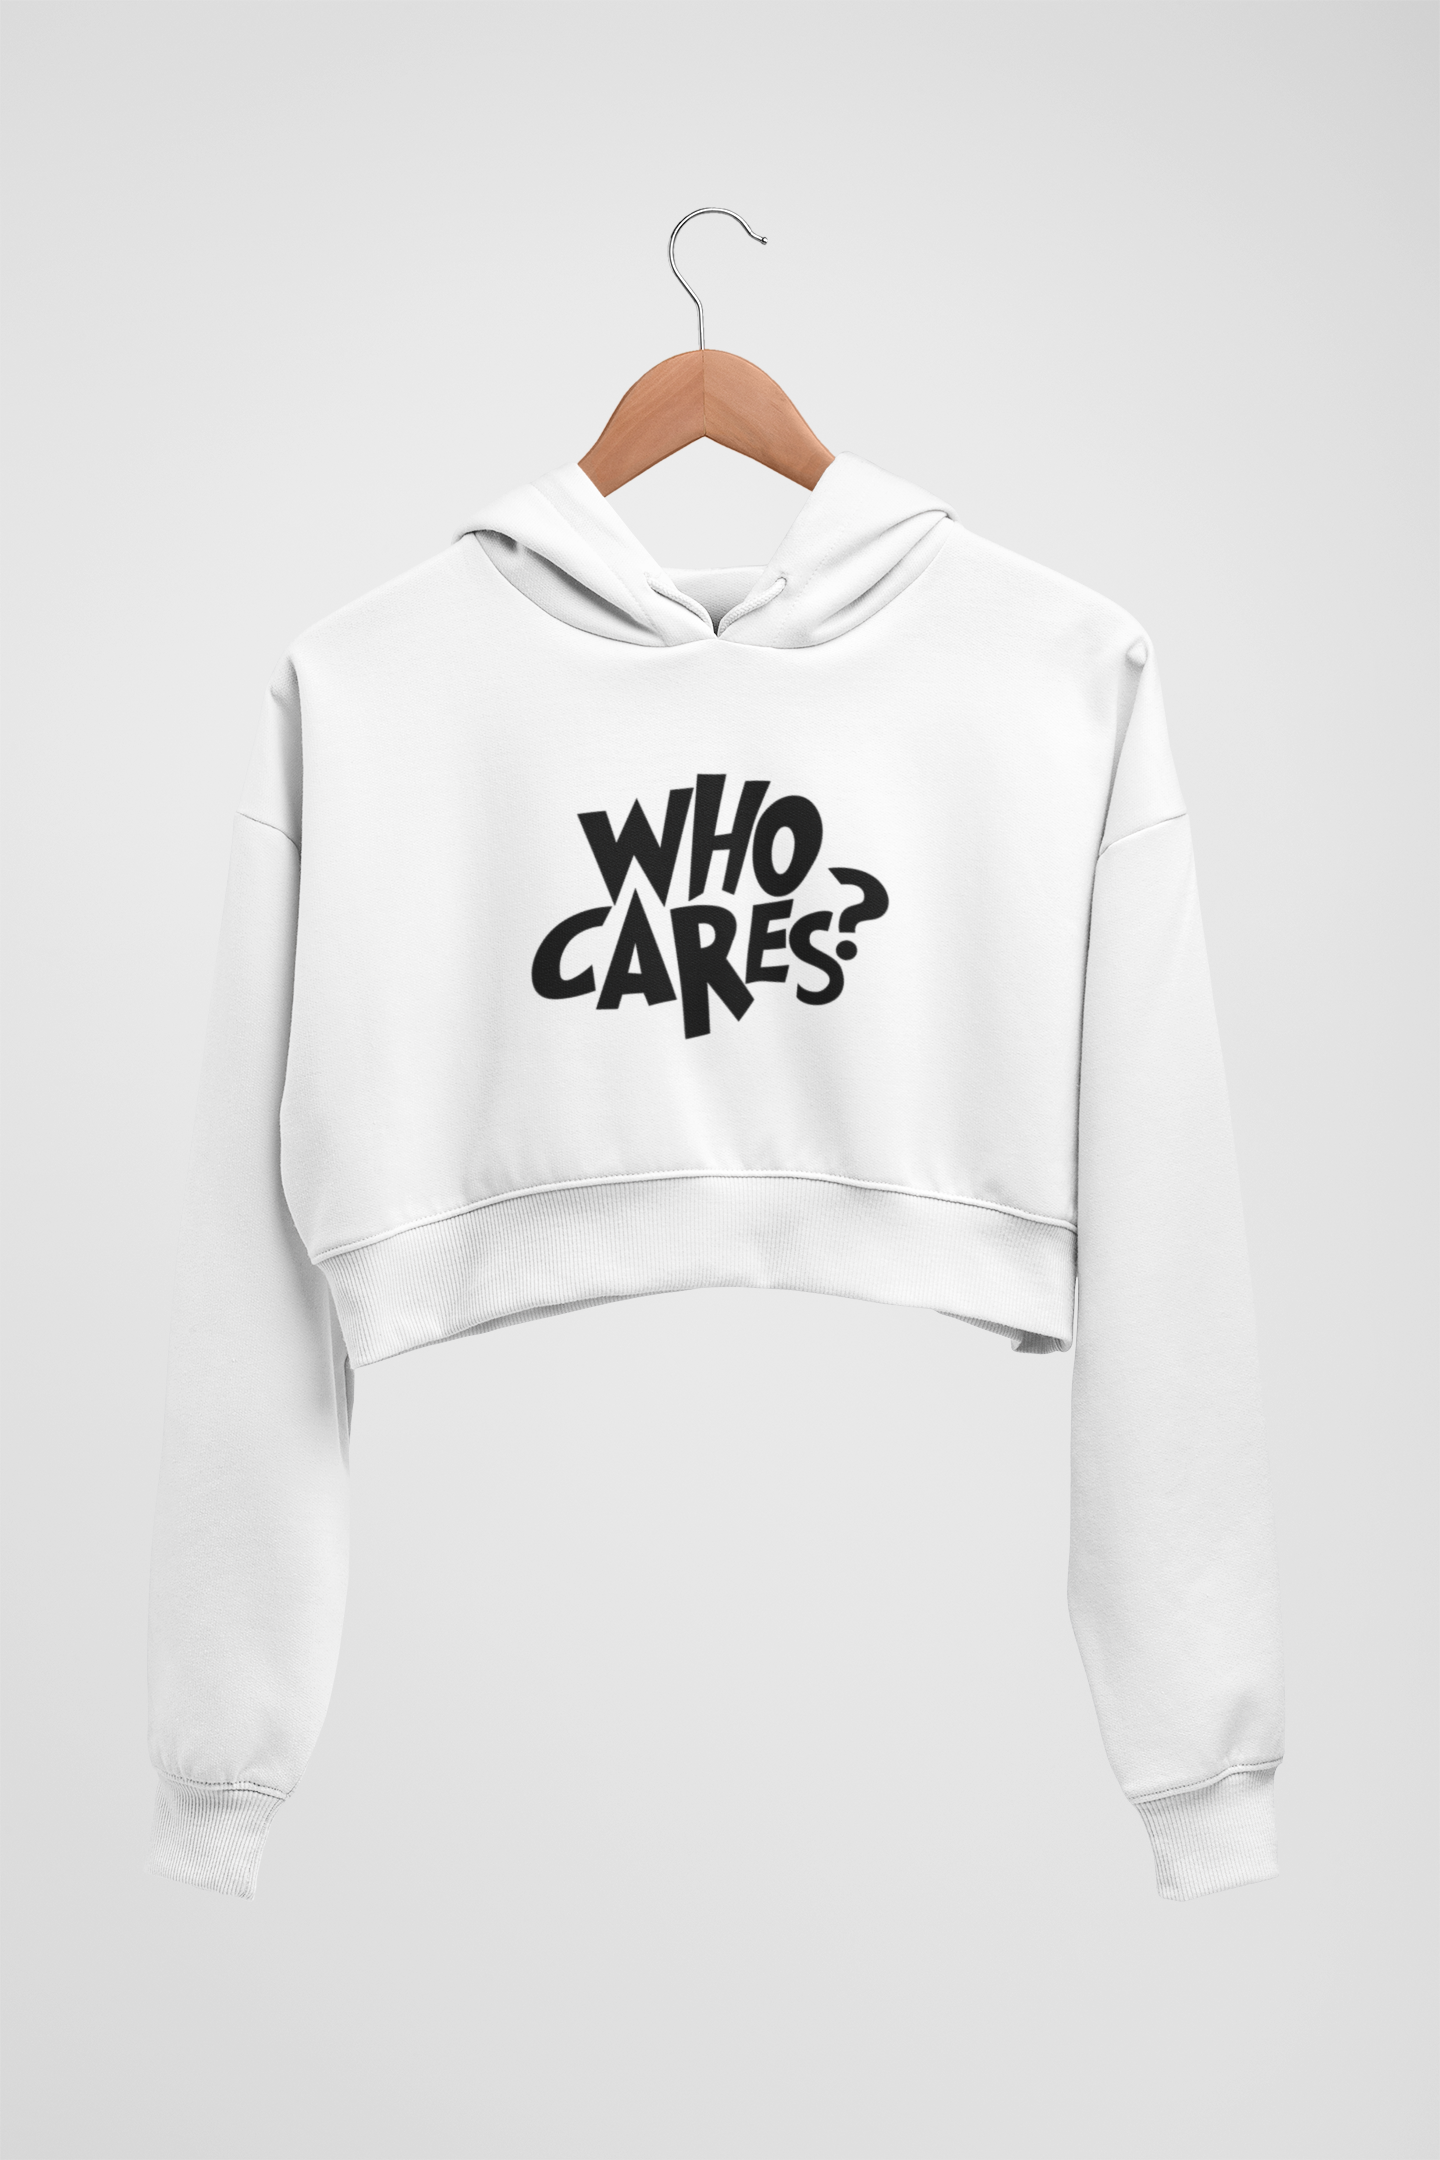 CROP HOODIES WHITE x WHO CARES?